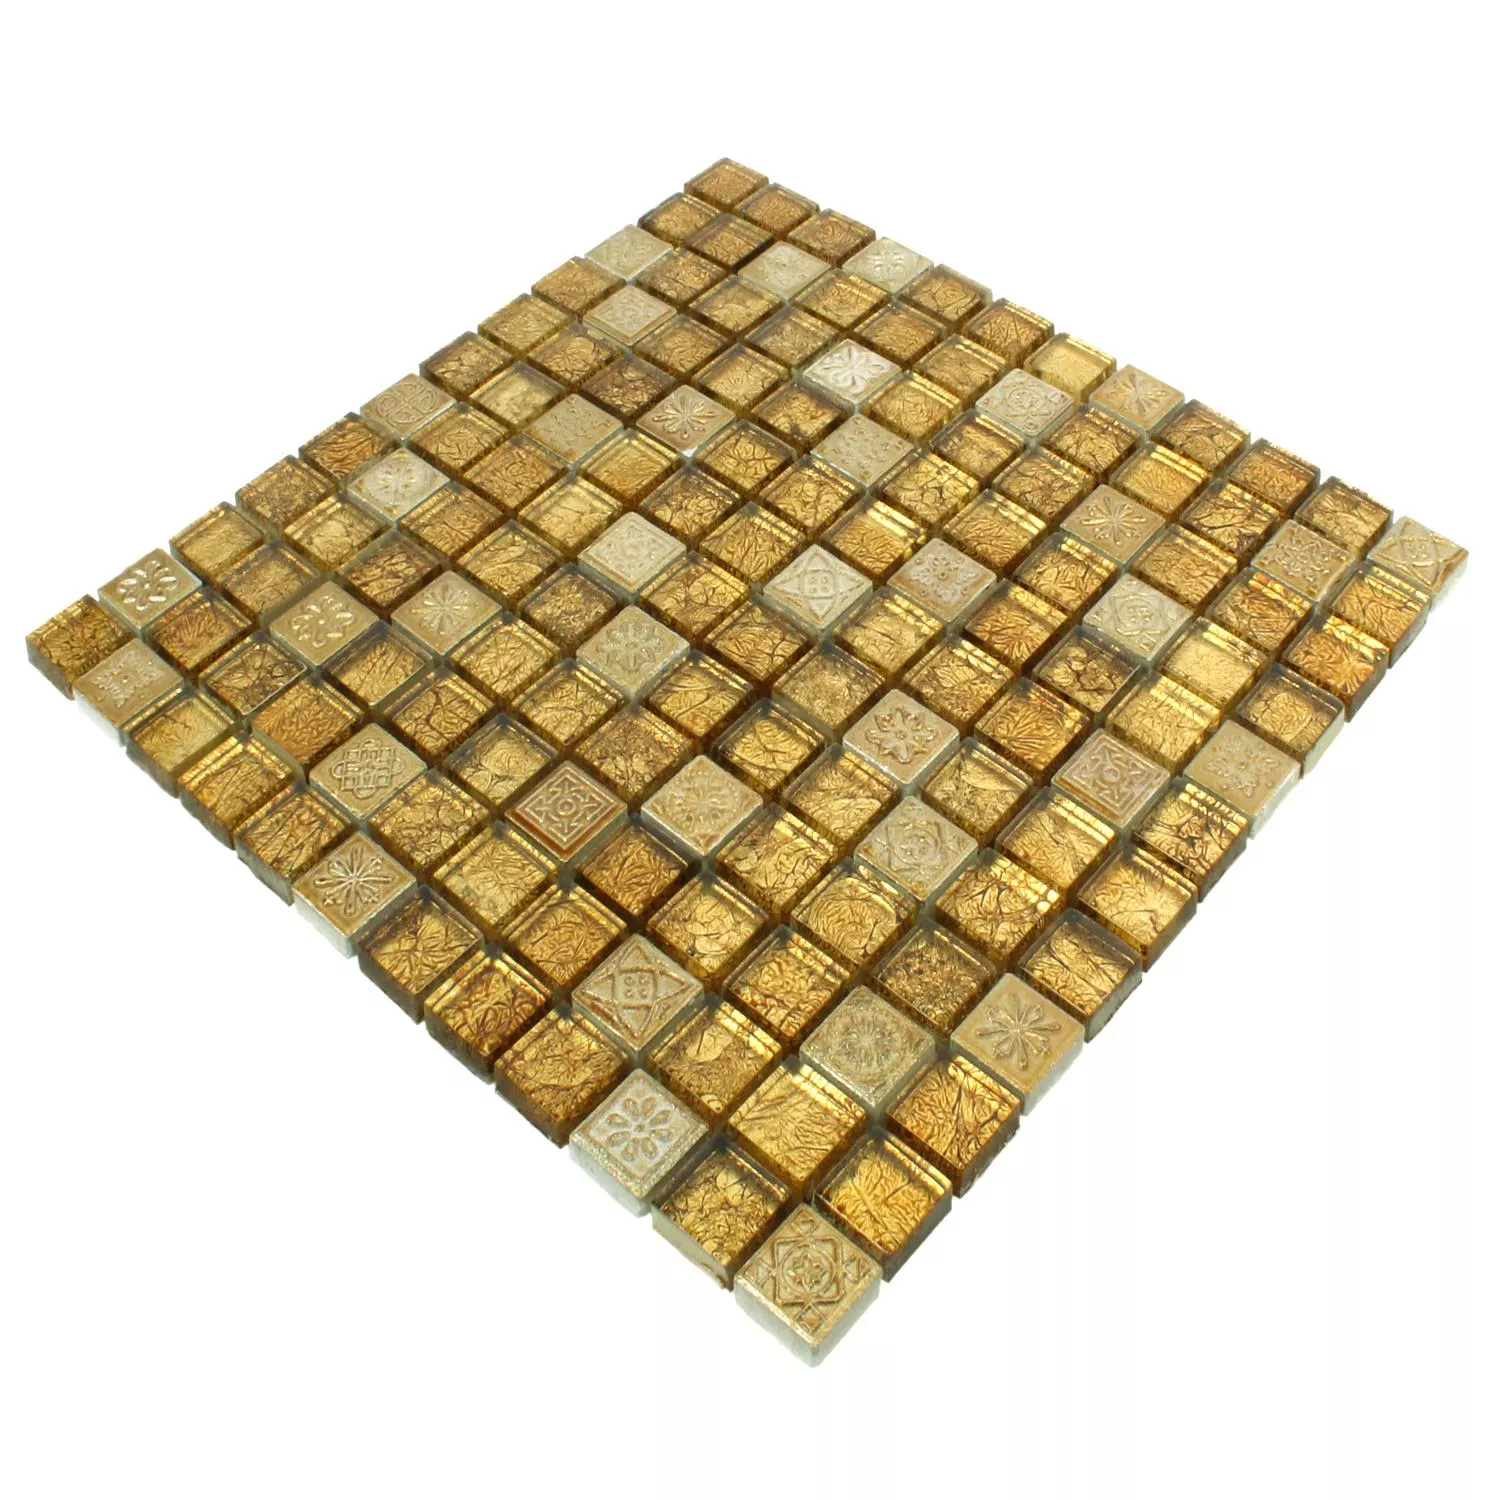 Sample Mosaic Tiles Glass Natural Stone Coloniale Gold